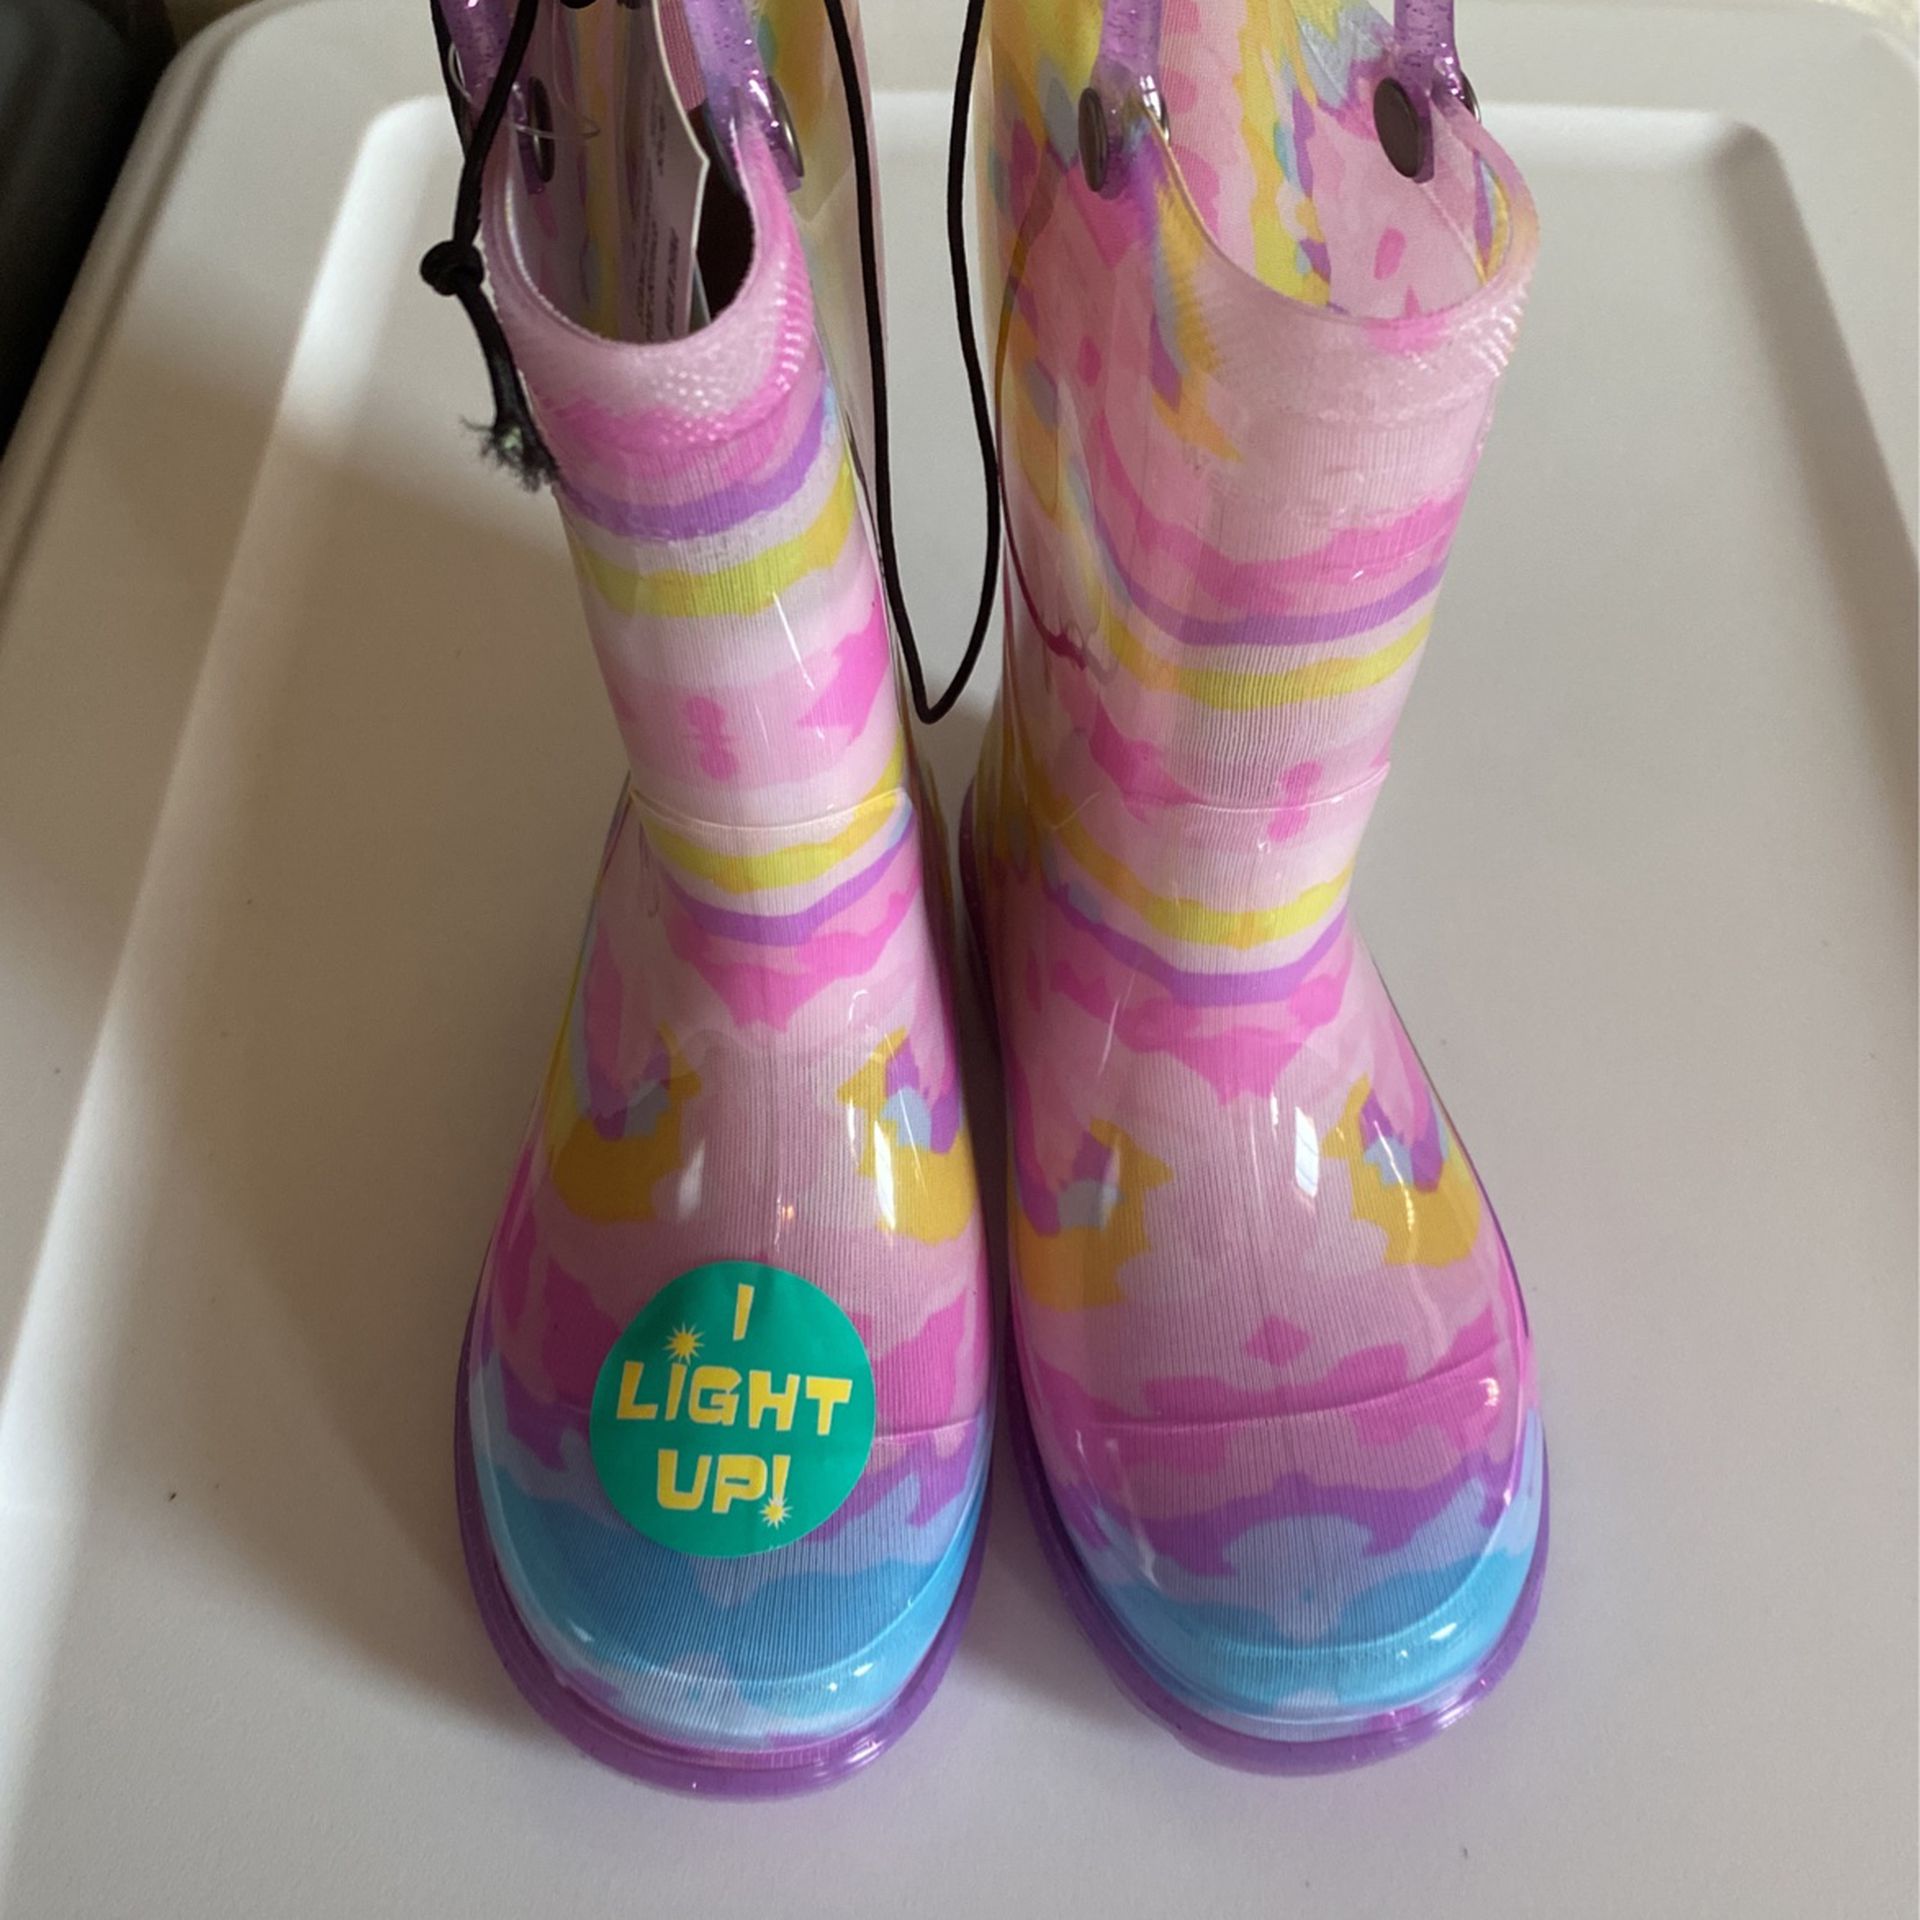 Western Chief Swirl Glittered Lighted Up Rain Boots Size (9)